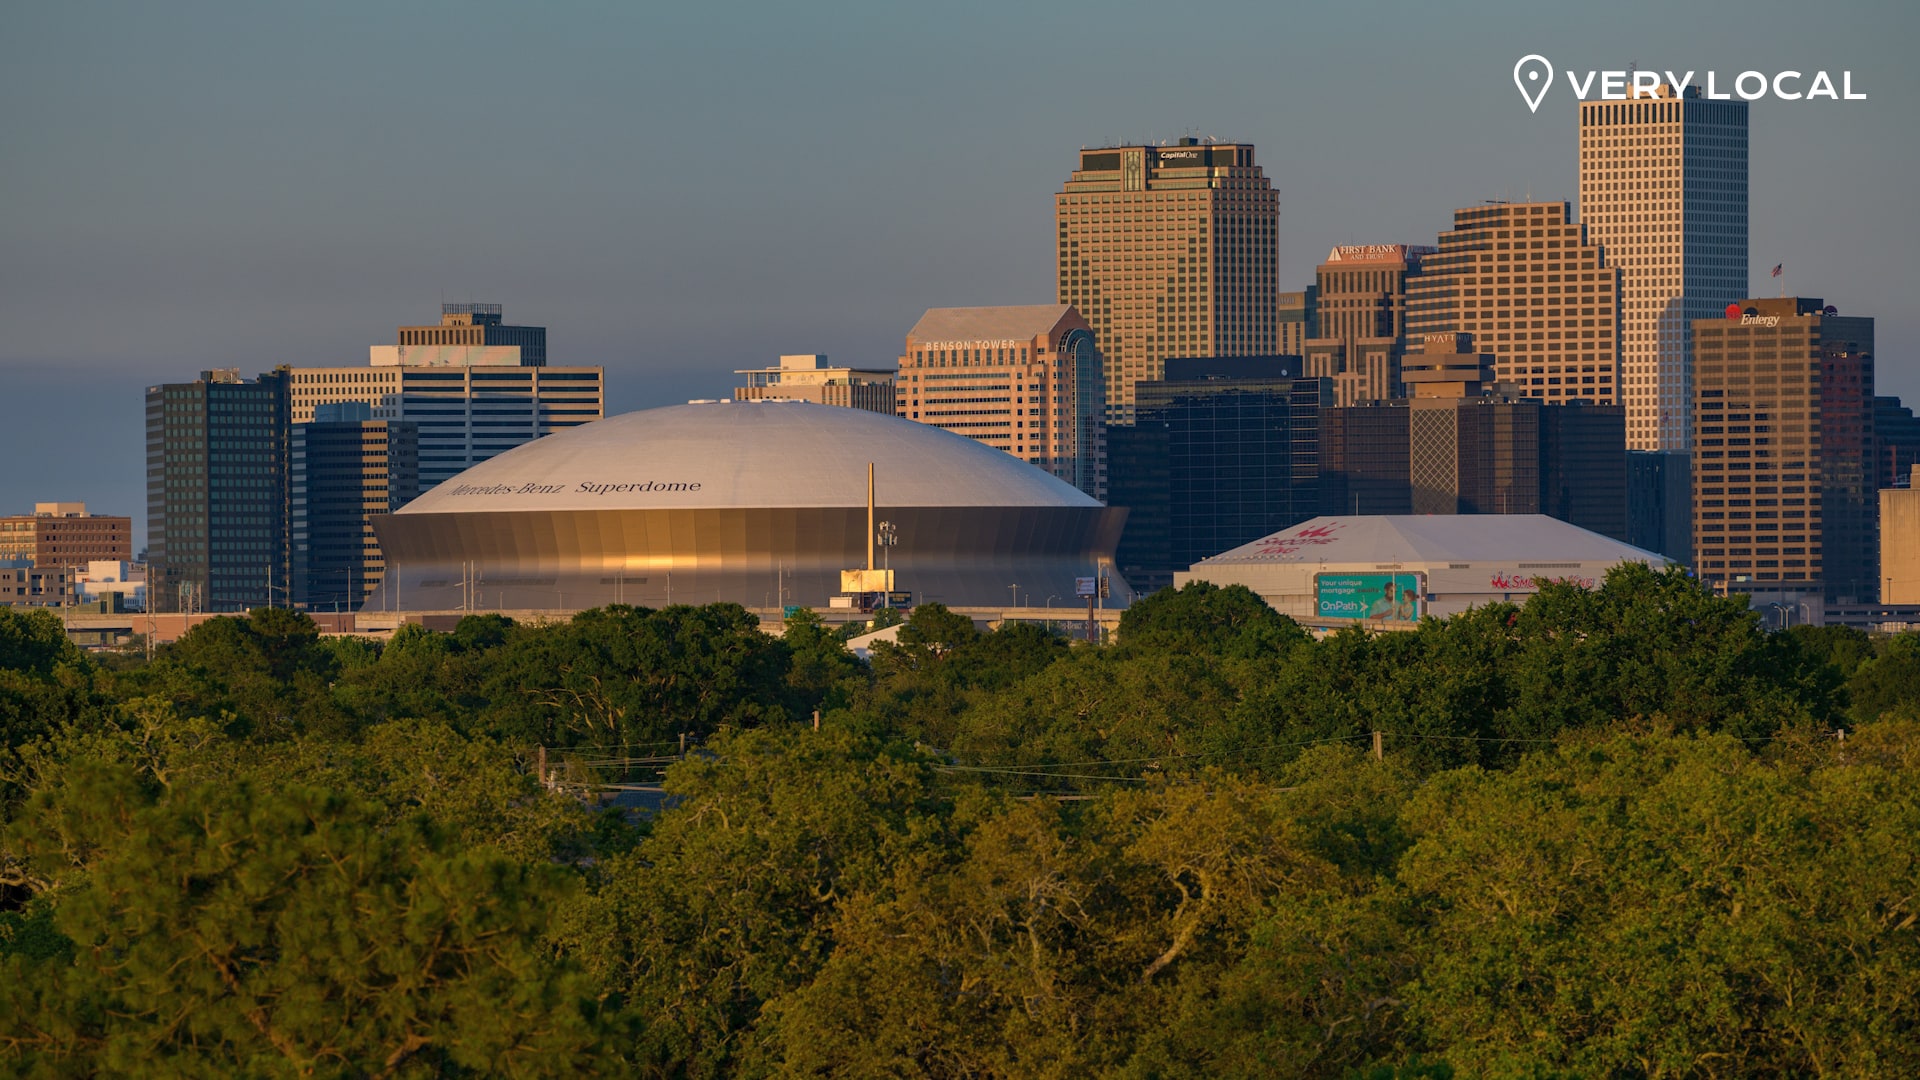 The Central Business District (CBD) skyline including the Superdome is seen in New Orleans, Monday, April 27, 2020. Photo by Matthew Hinton